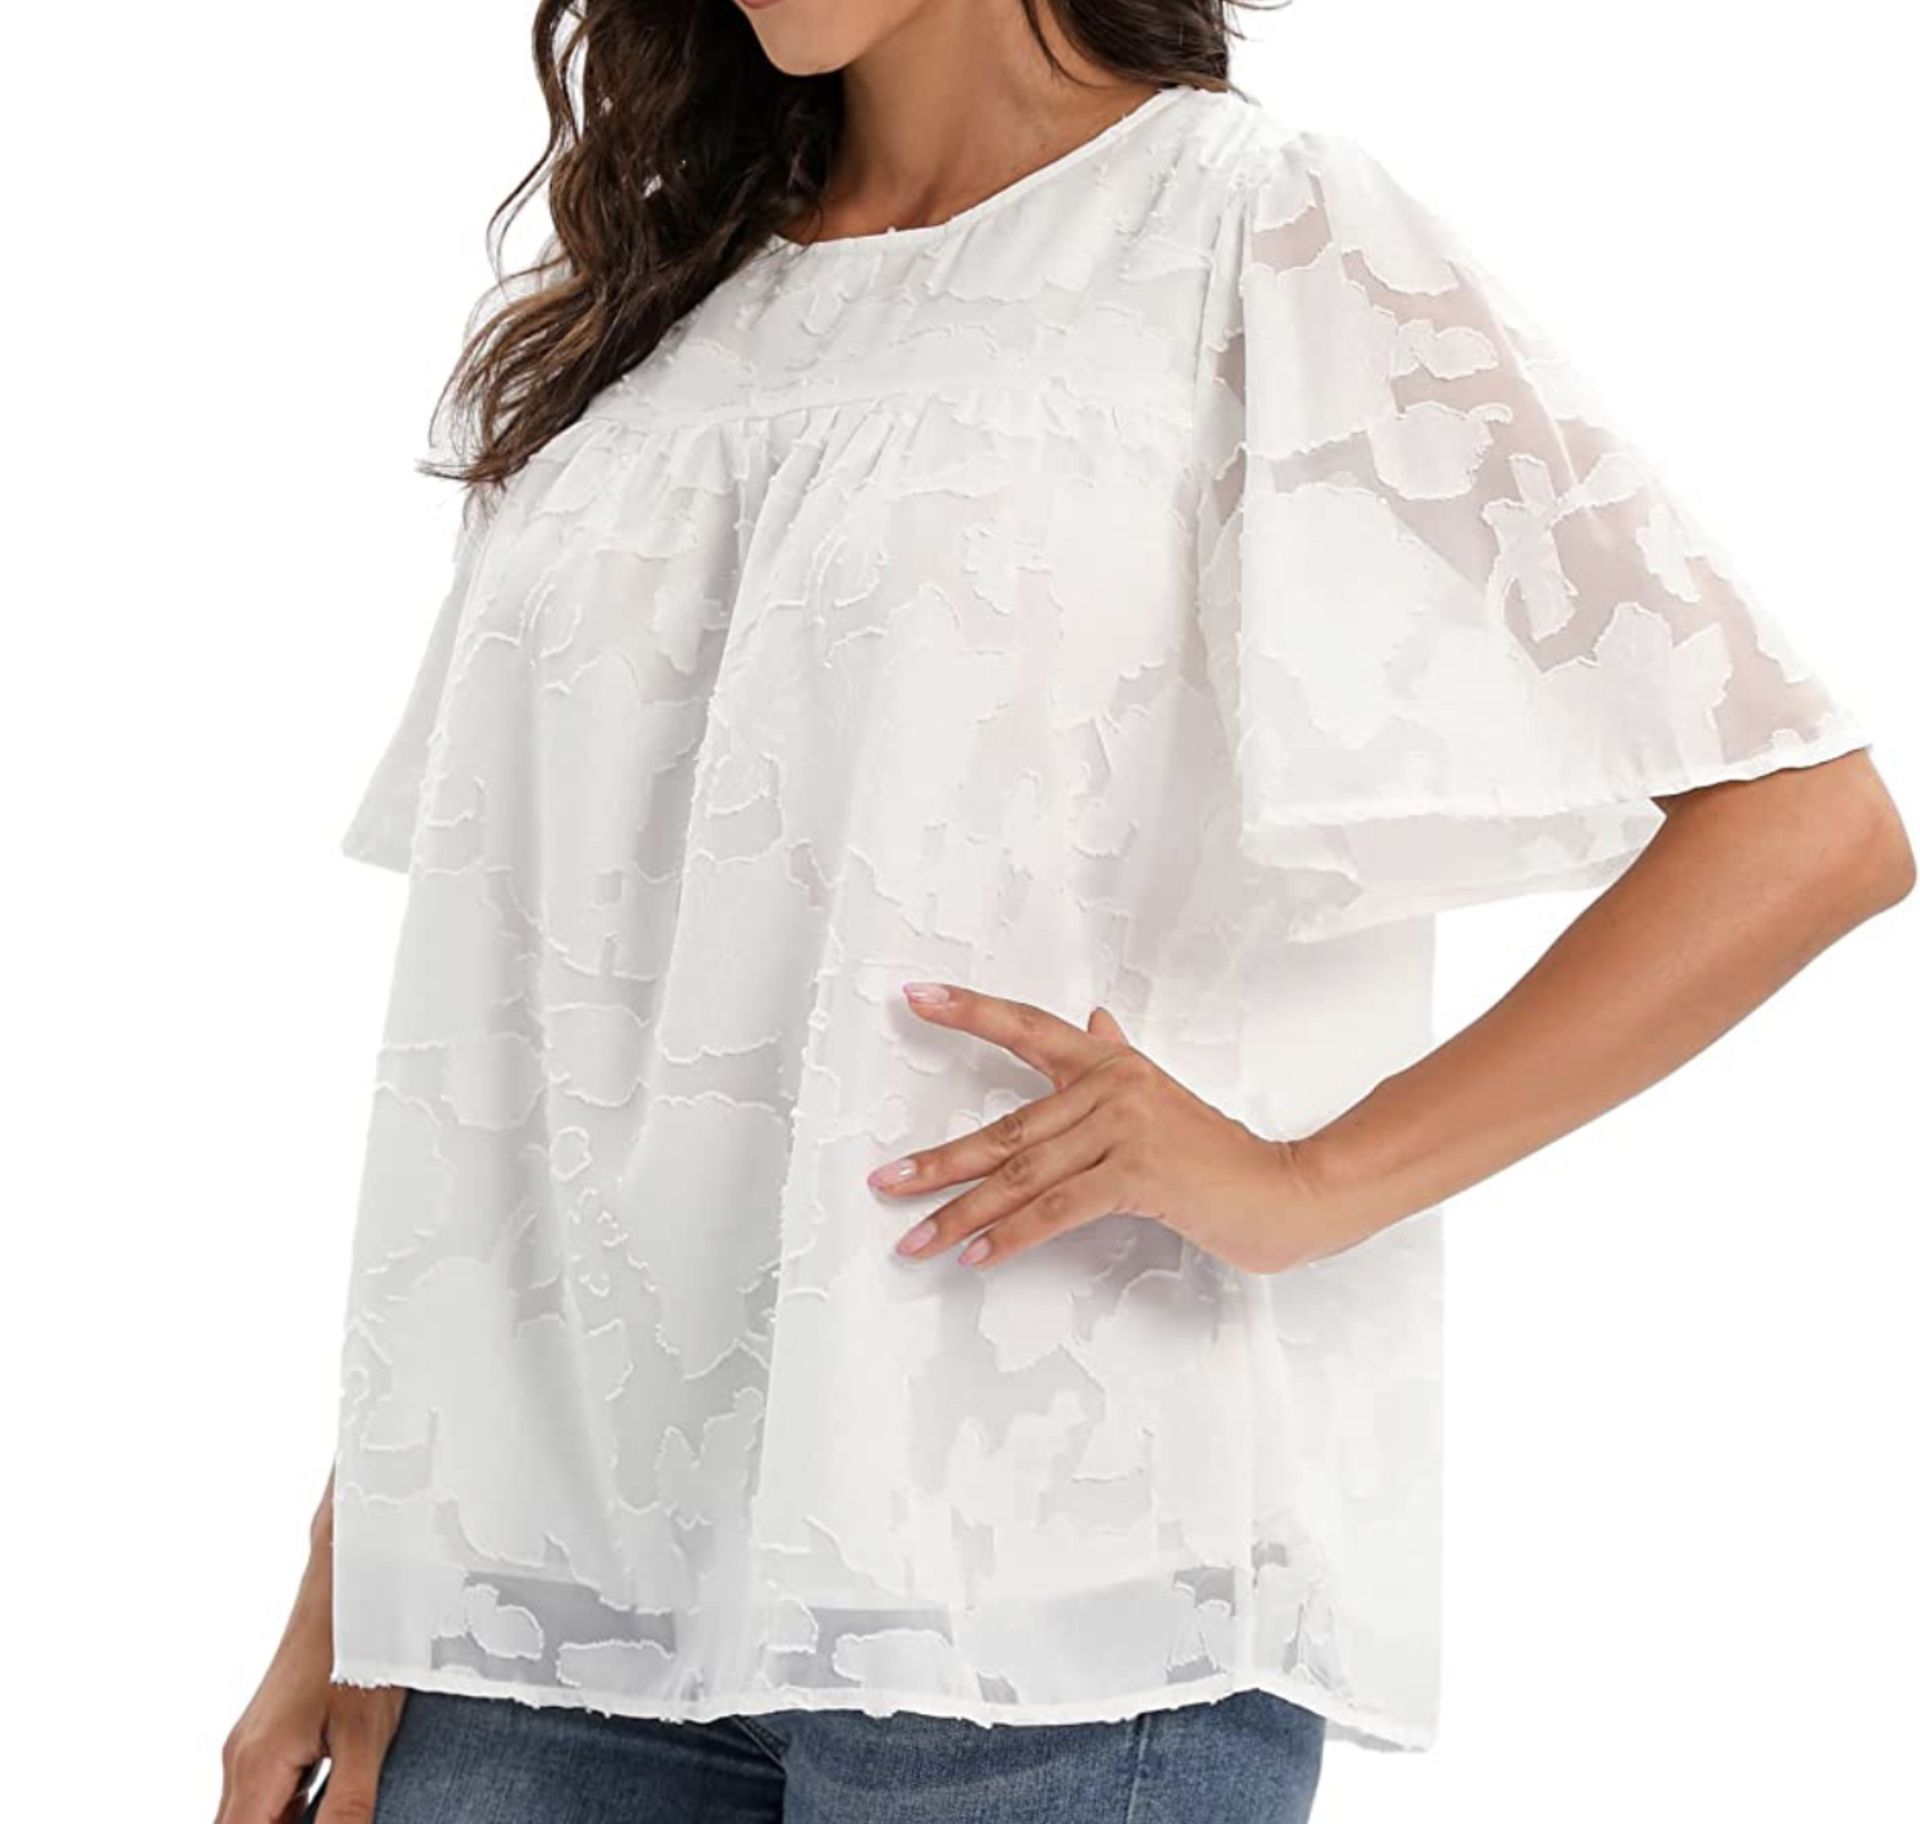 RRP £19.99 Modojuny Women's Casual Loose Chiffon Blouse Floral Textured Top, Large